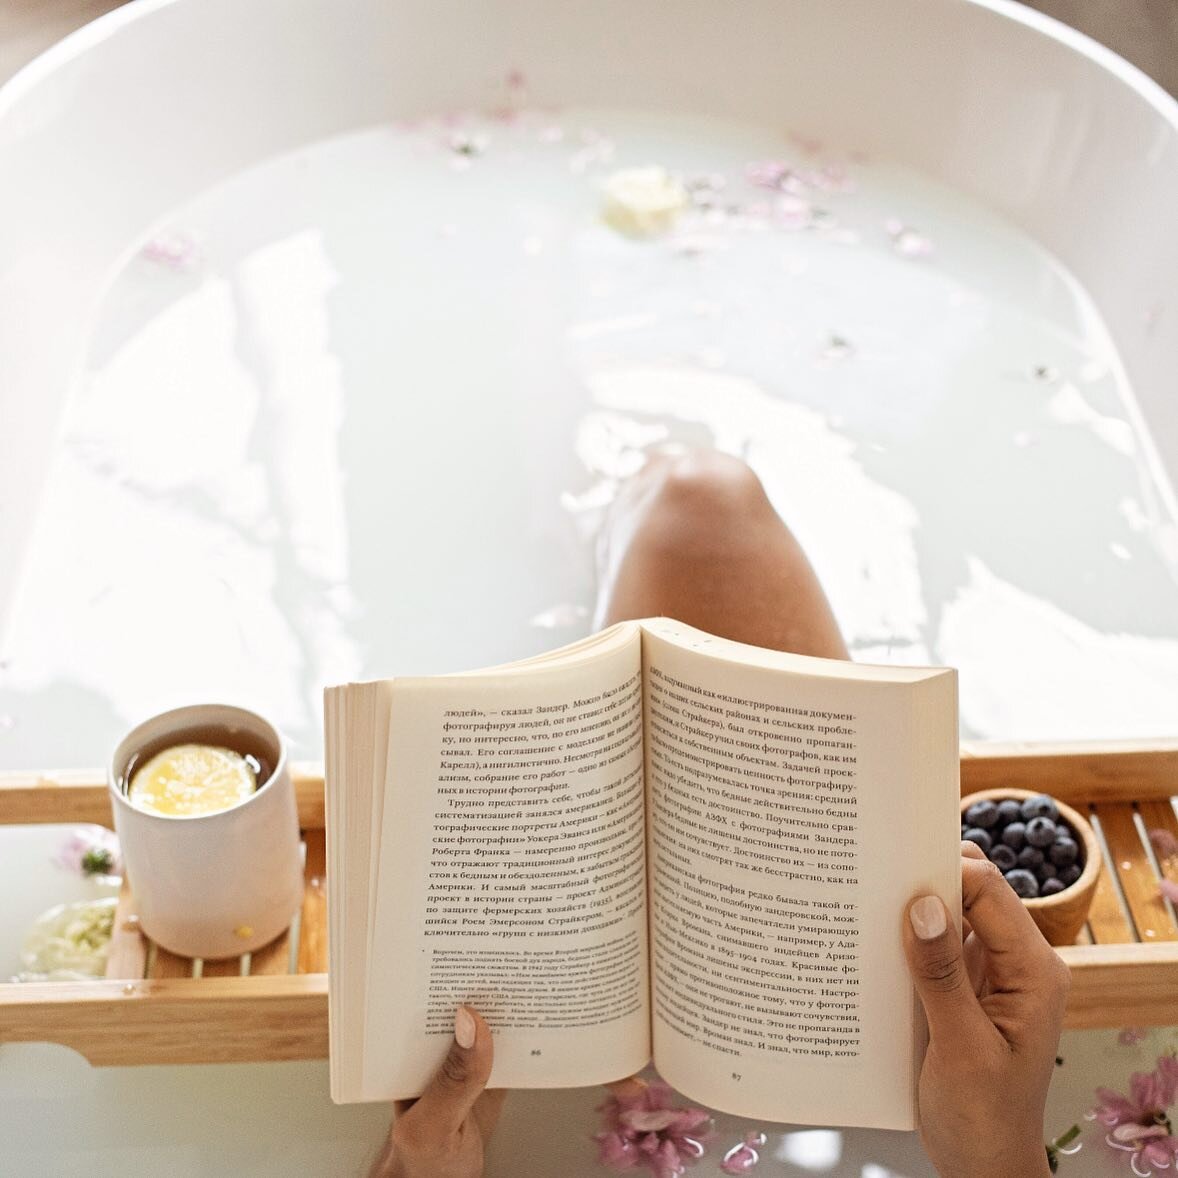 Write a caption... It's Self-Care Sunday, so don't forget to make time for yourself. Whether it's a warm bath, a good book, or a favorite hobby, indulge in what brings you joy and relaxation today. You deserve it! 🌻💆&zwj;♀️ ⁣
.⁣
.⁣
.⁣
.⁣
.⁣
#cutcho